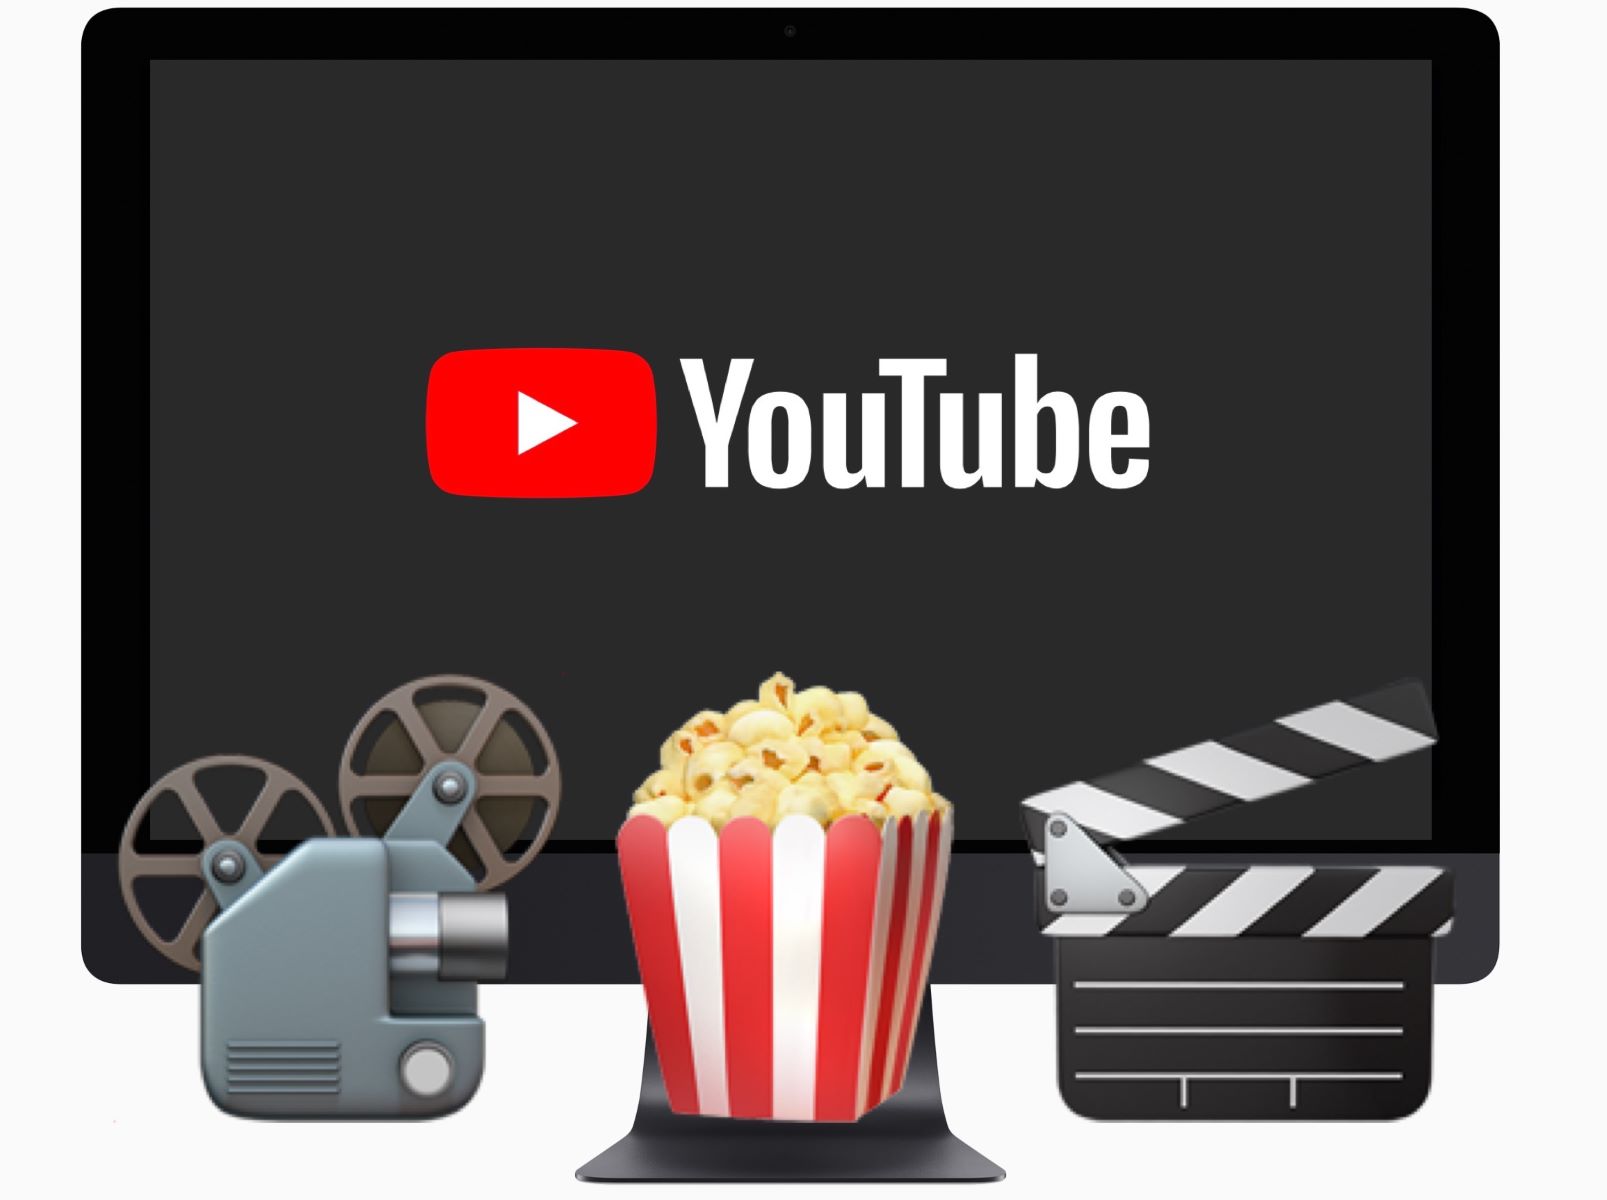 How To Watch Full Movies On Youtube For Free | CitizenSide